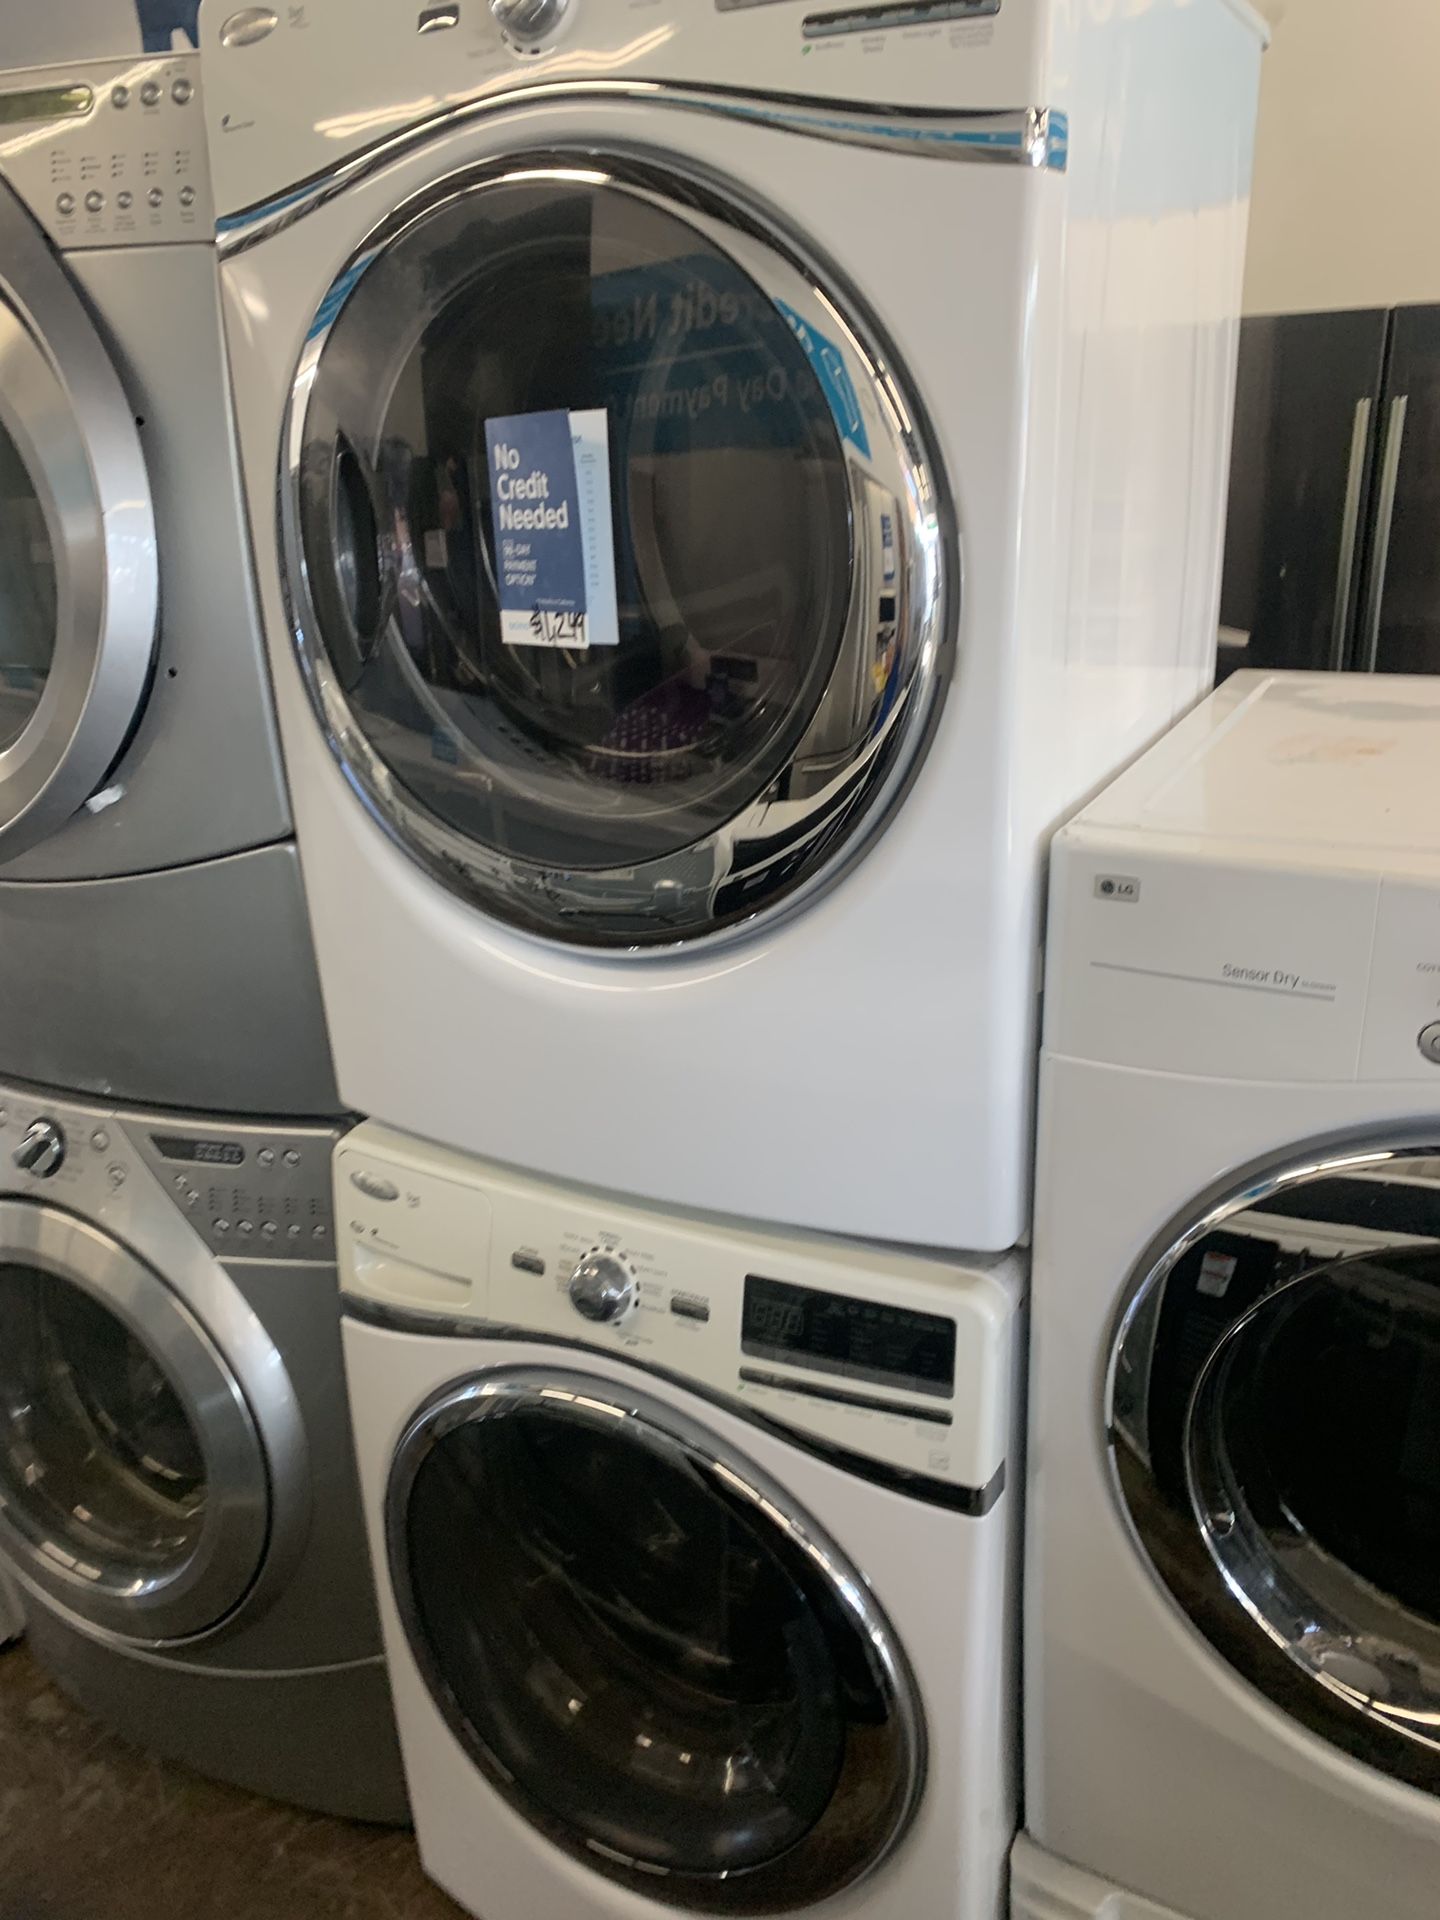 Washer and dryer